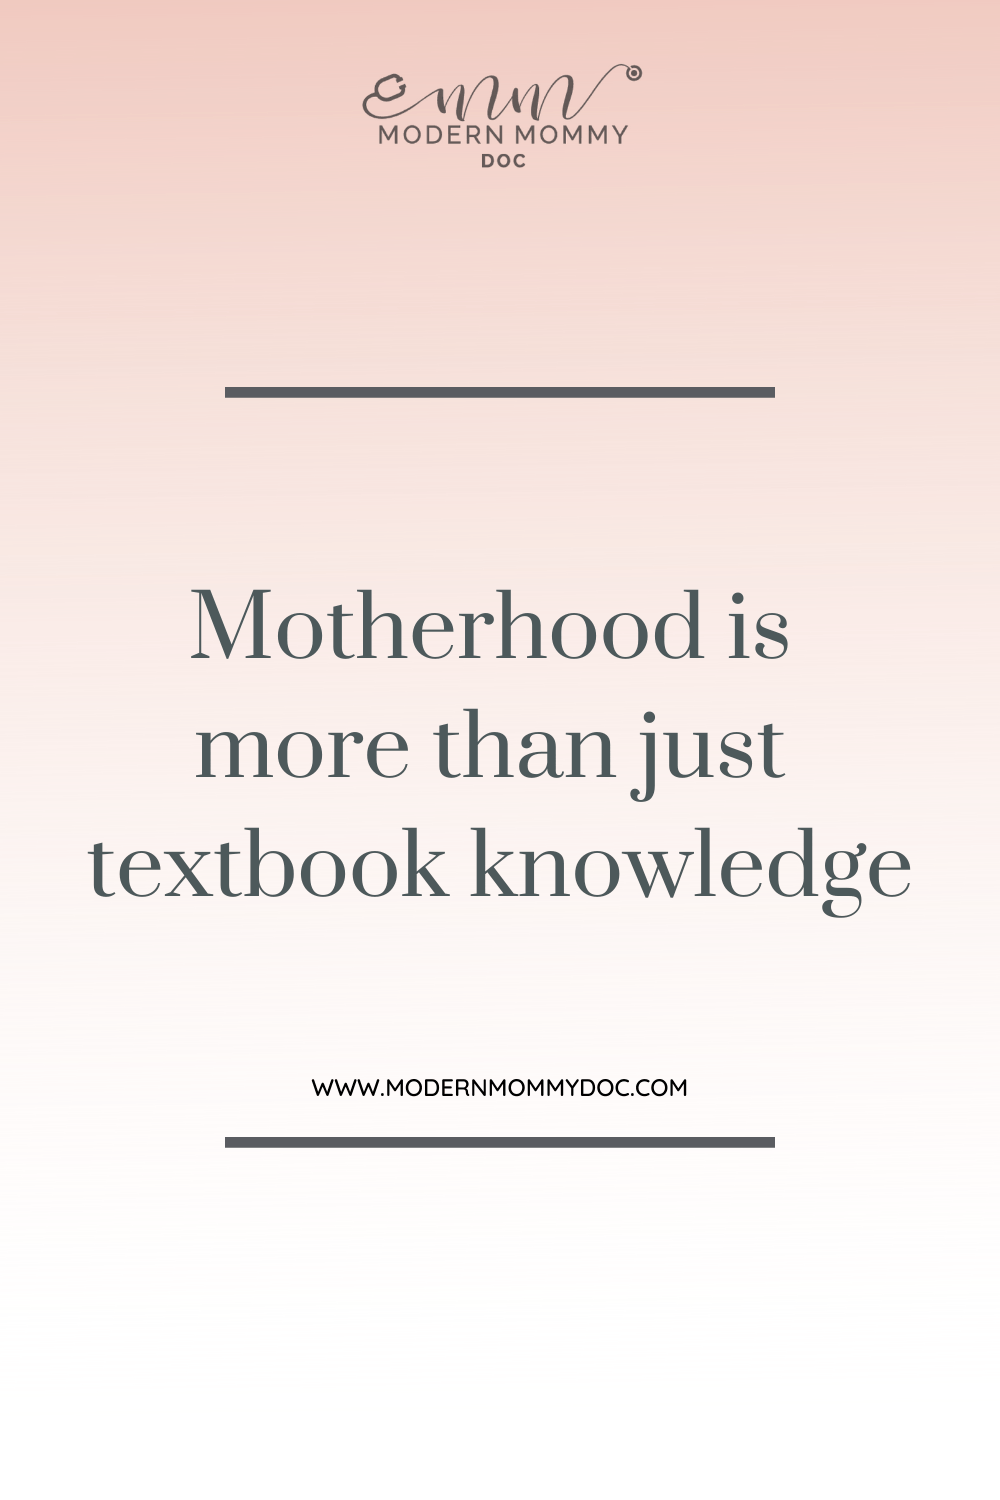 Motherhood is more than just textbook knowledge